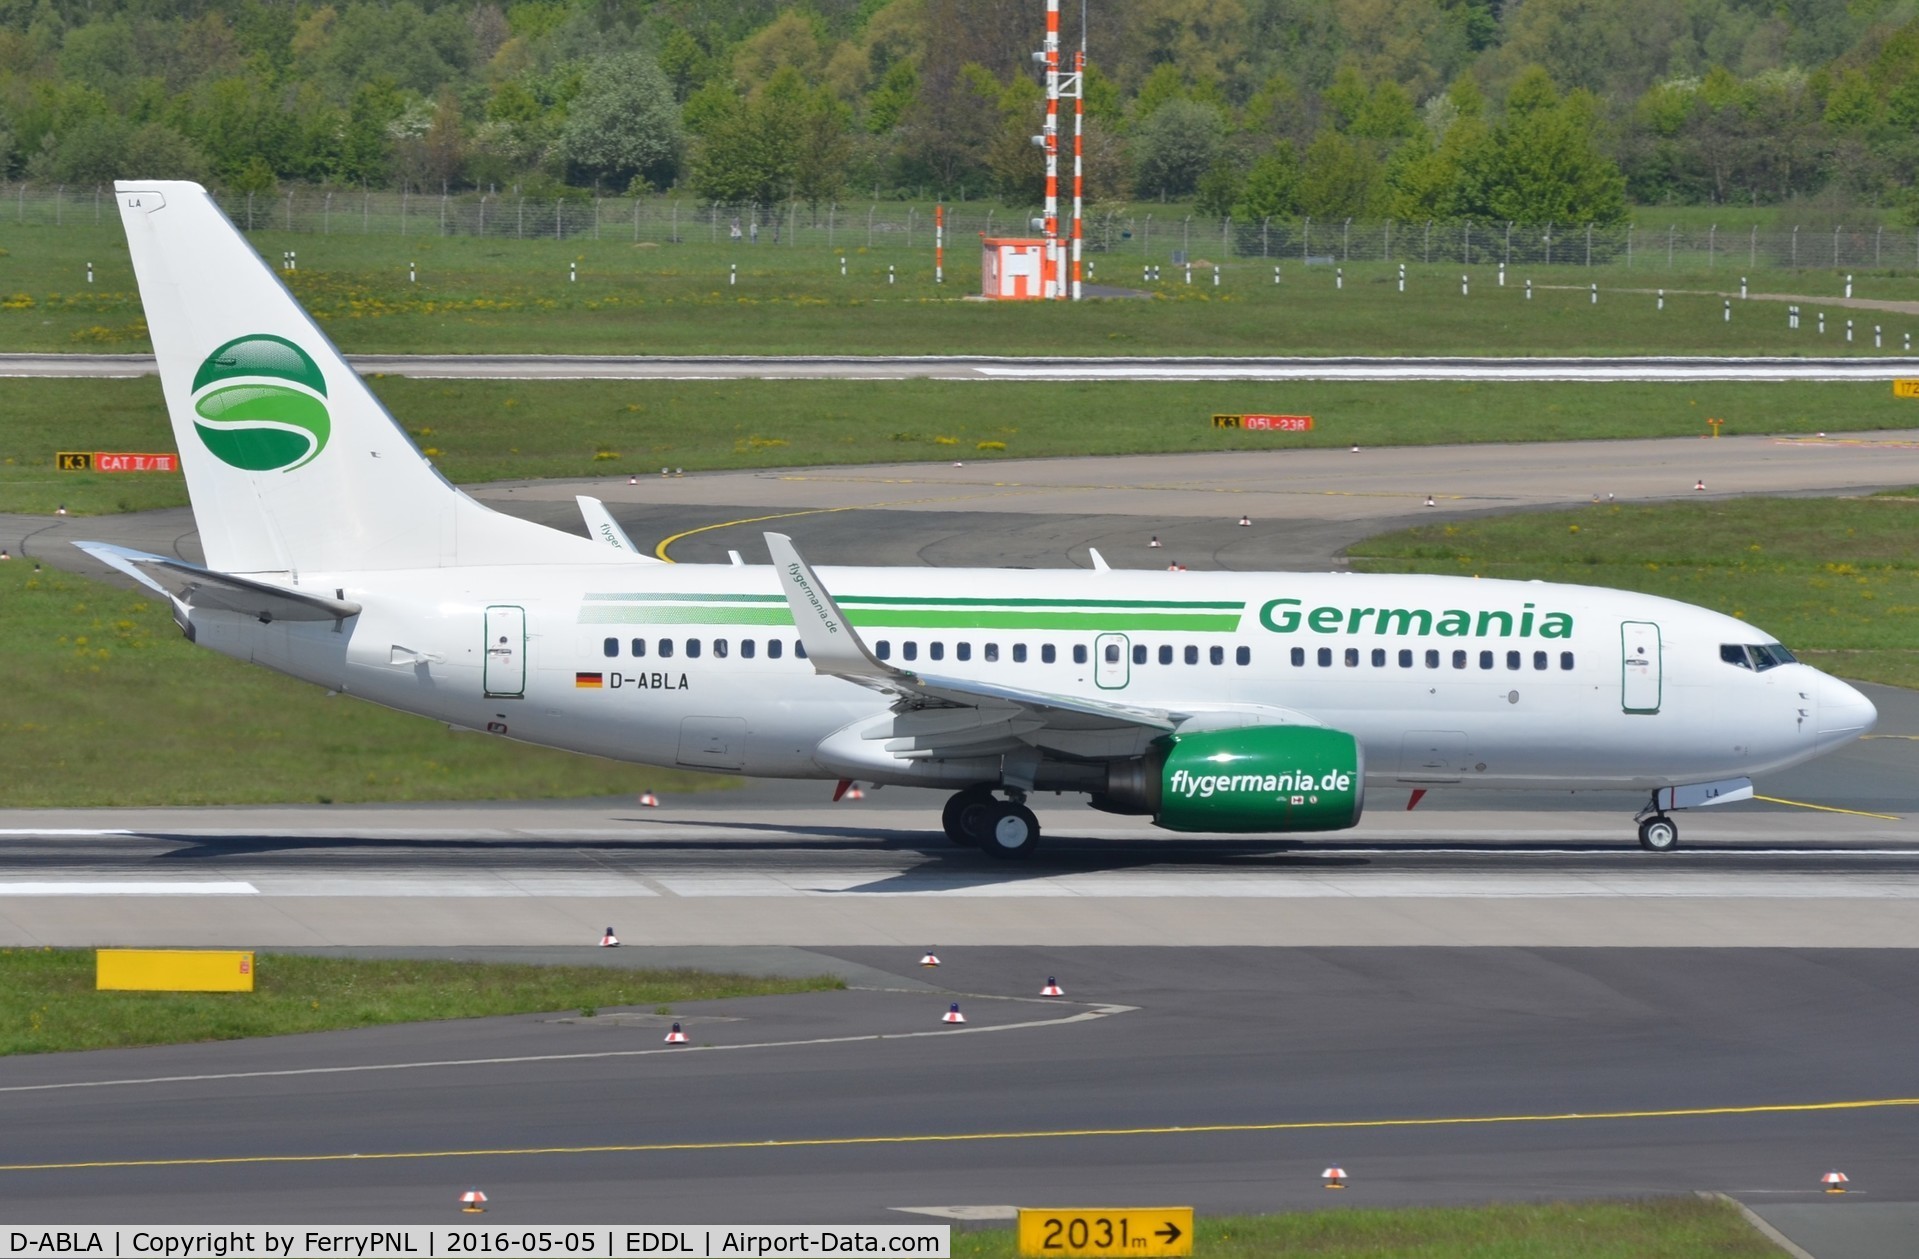 D-ABLA, 2007 Boeing 737-76J C/N 36114, Germania B737 taking off, formally operated by Air Berlin.